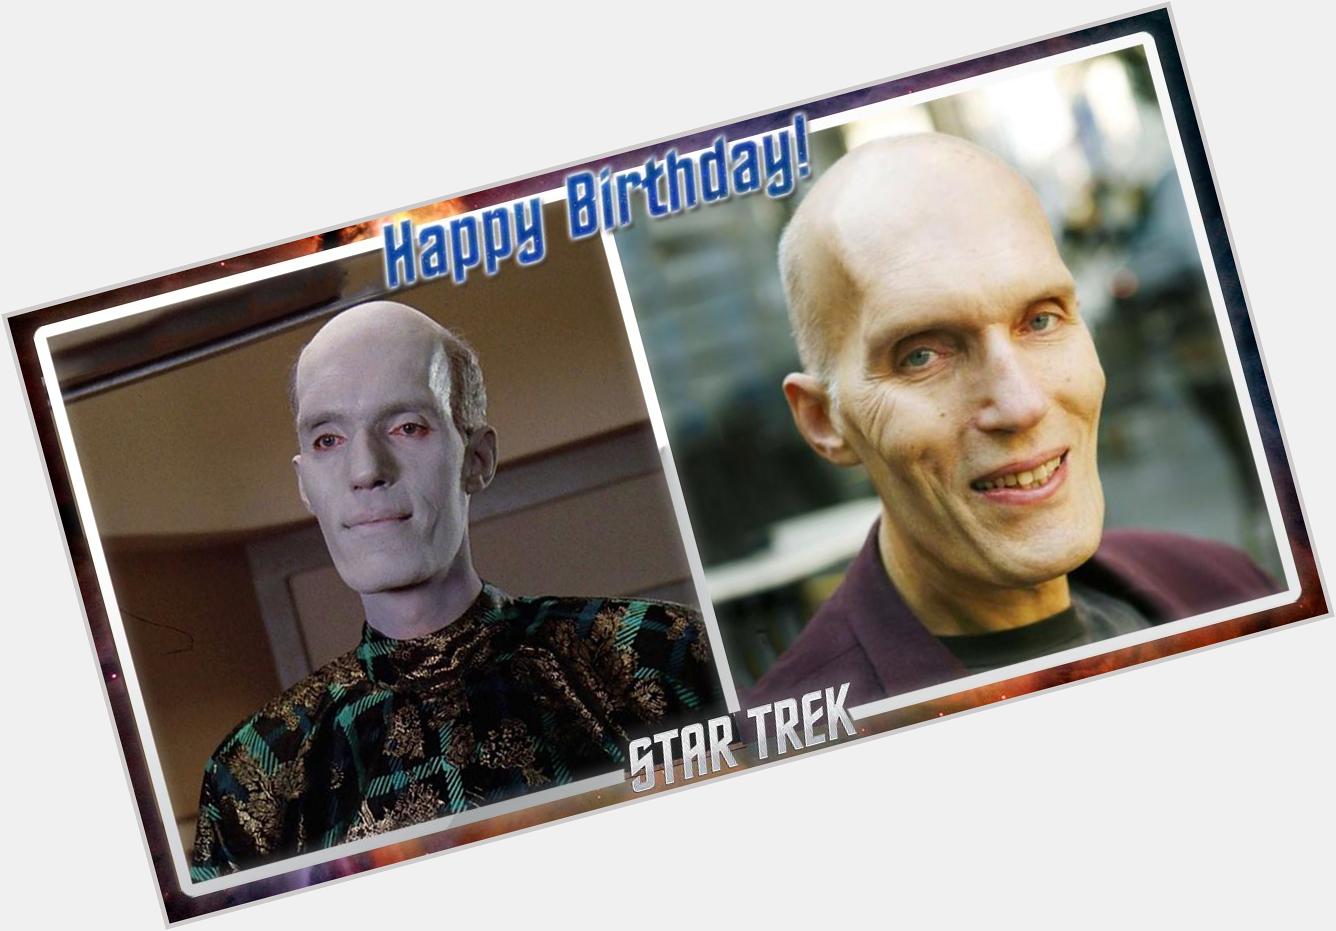 Happy Birthday to Carel Struycken! Do you remember which episode he appeared in? 